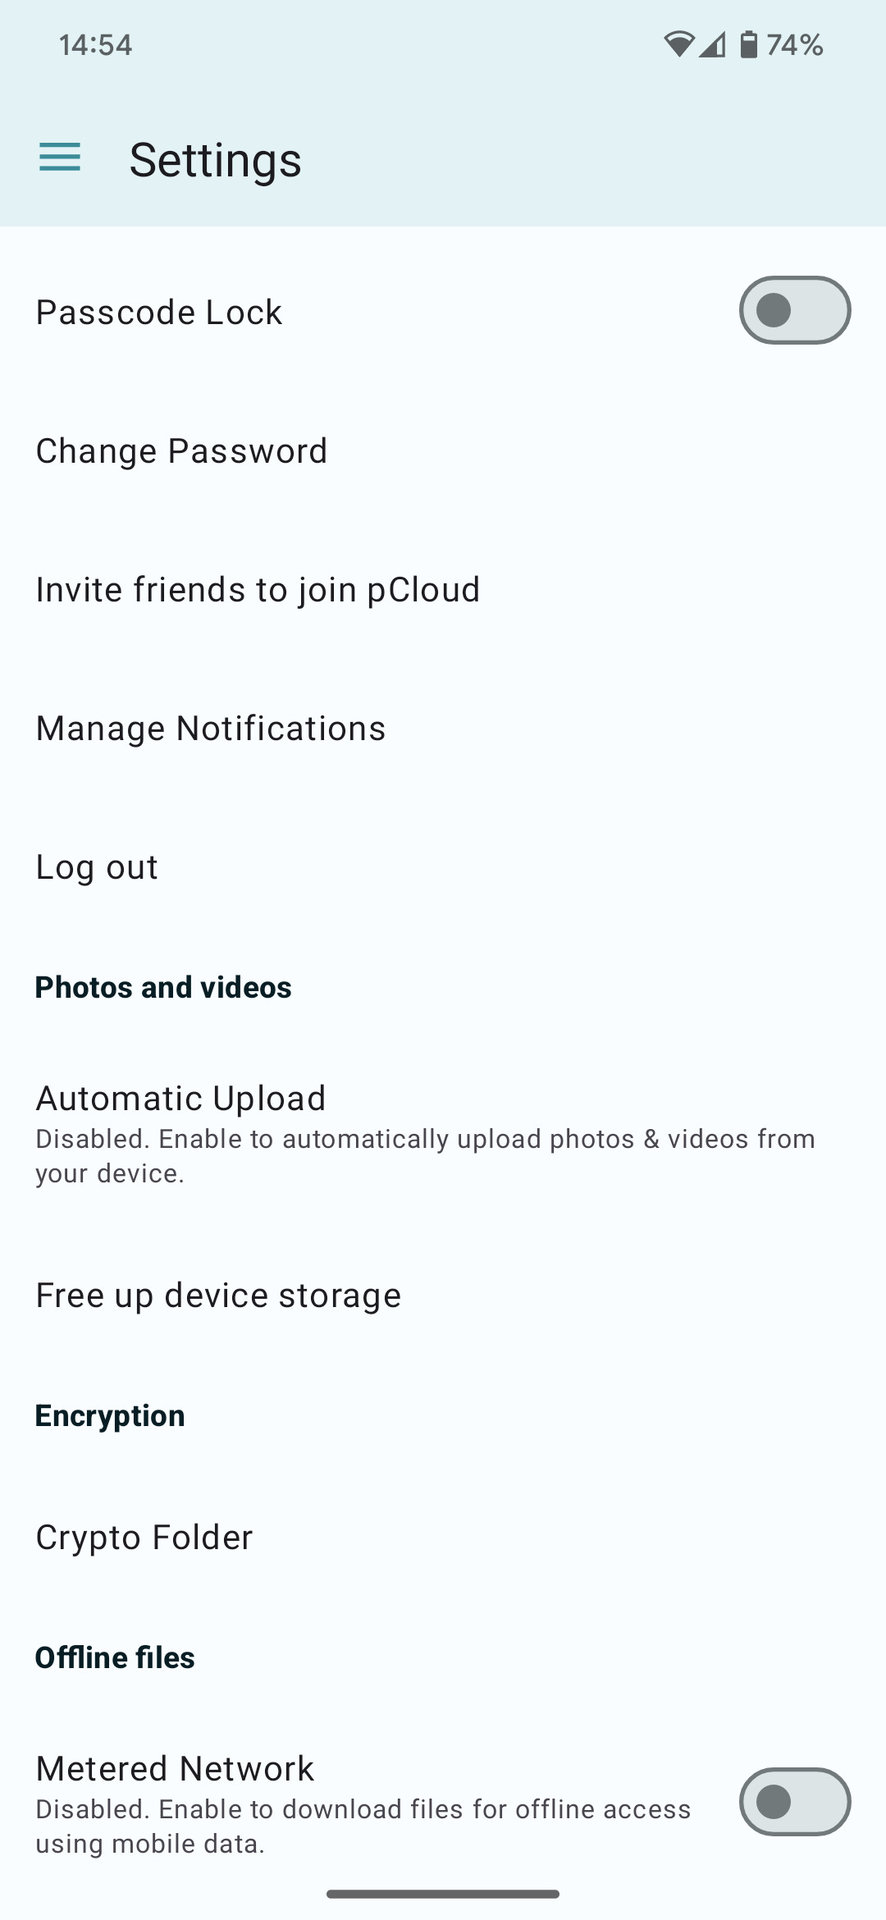 pCloud settings android app